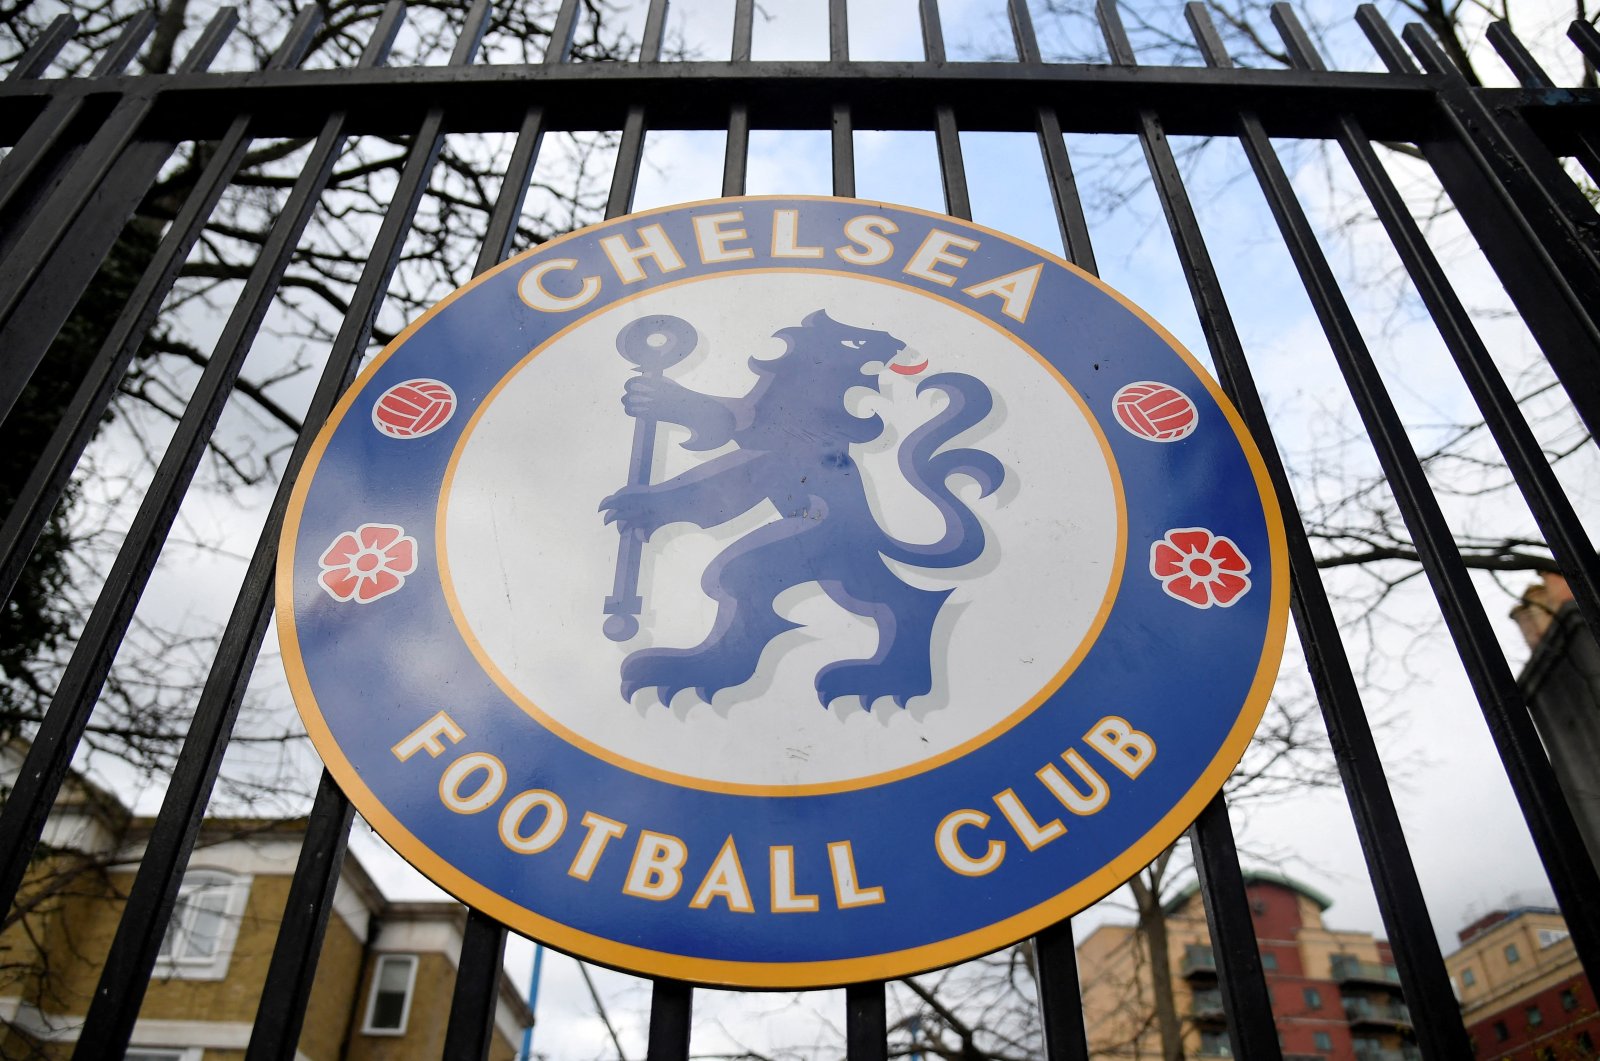 The Chelsea emblem is seen at an entrance to Stamford Bridge, London, England, March 3, 2022. (REUTERS Photo)